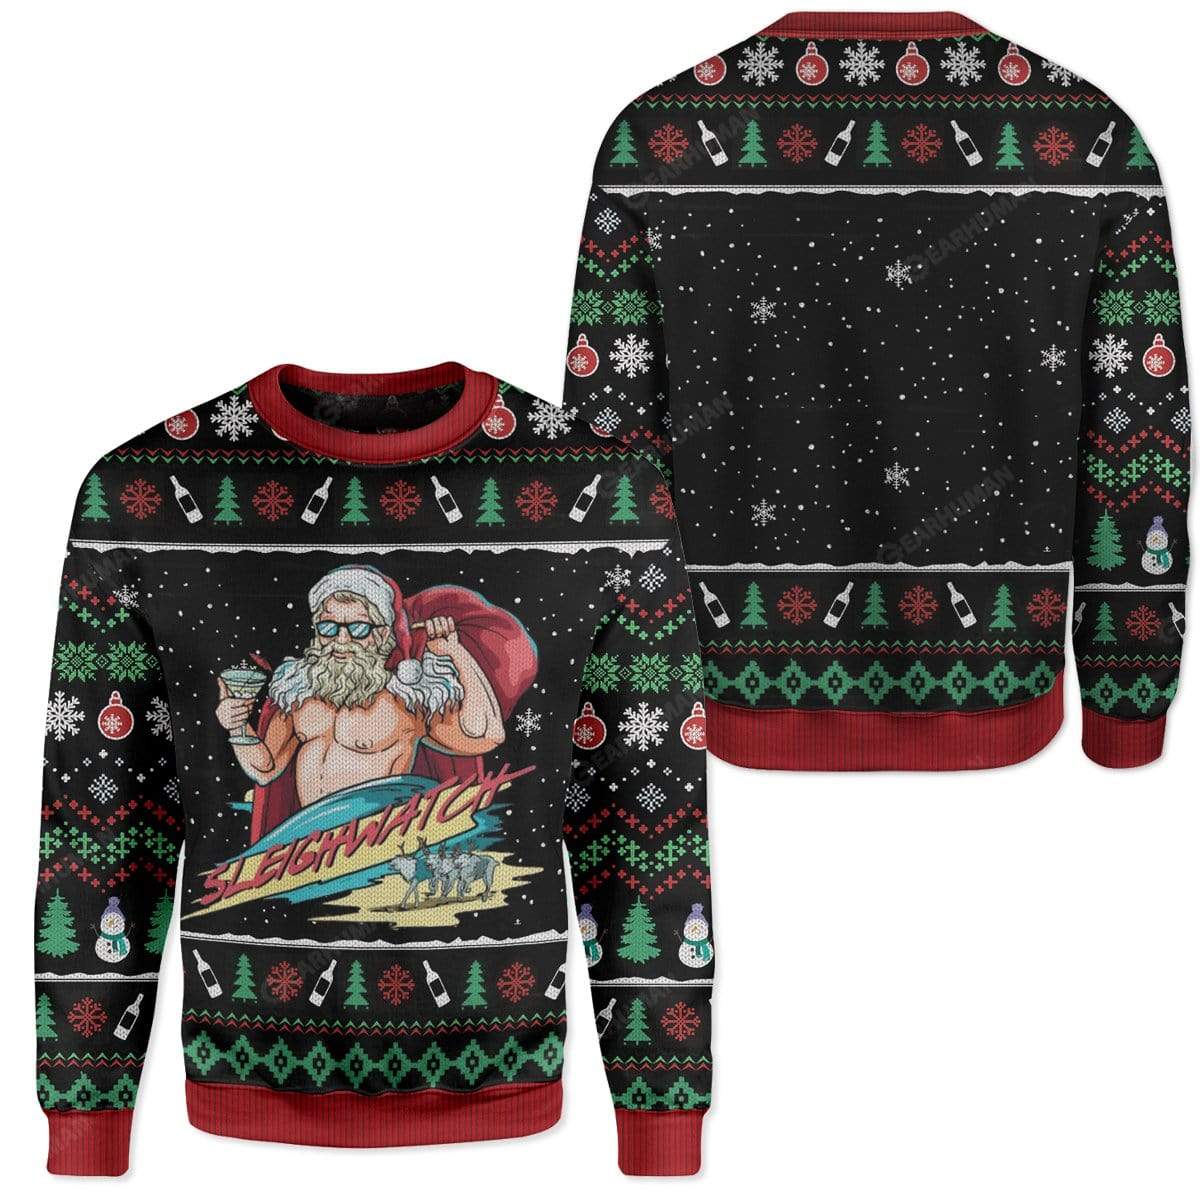 Ugly Sleighwatch Custom Sweater Apparel HD-AT11111908 Ugly Christmas Sweater 